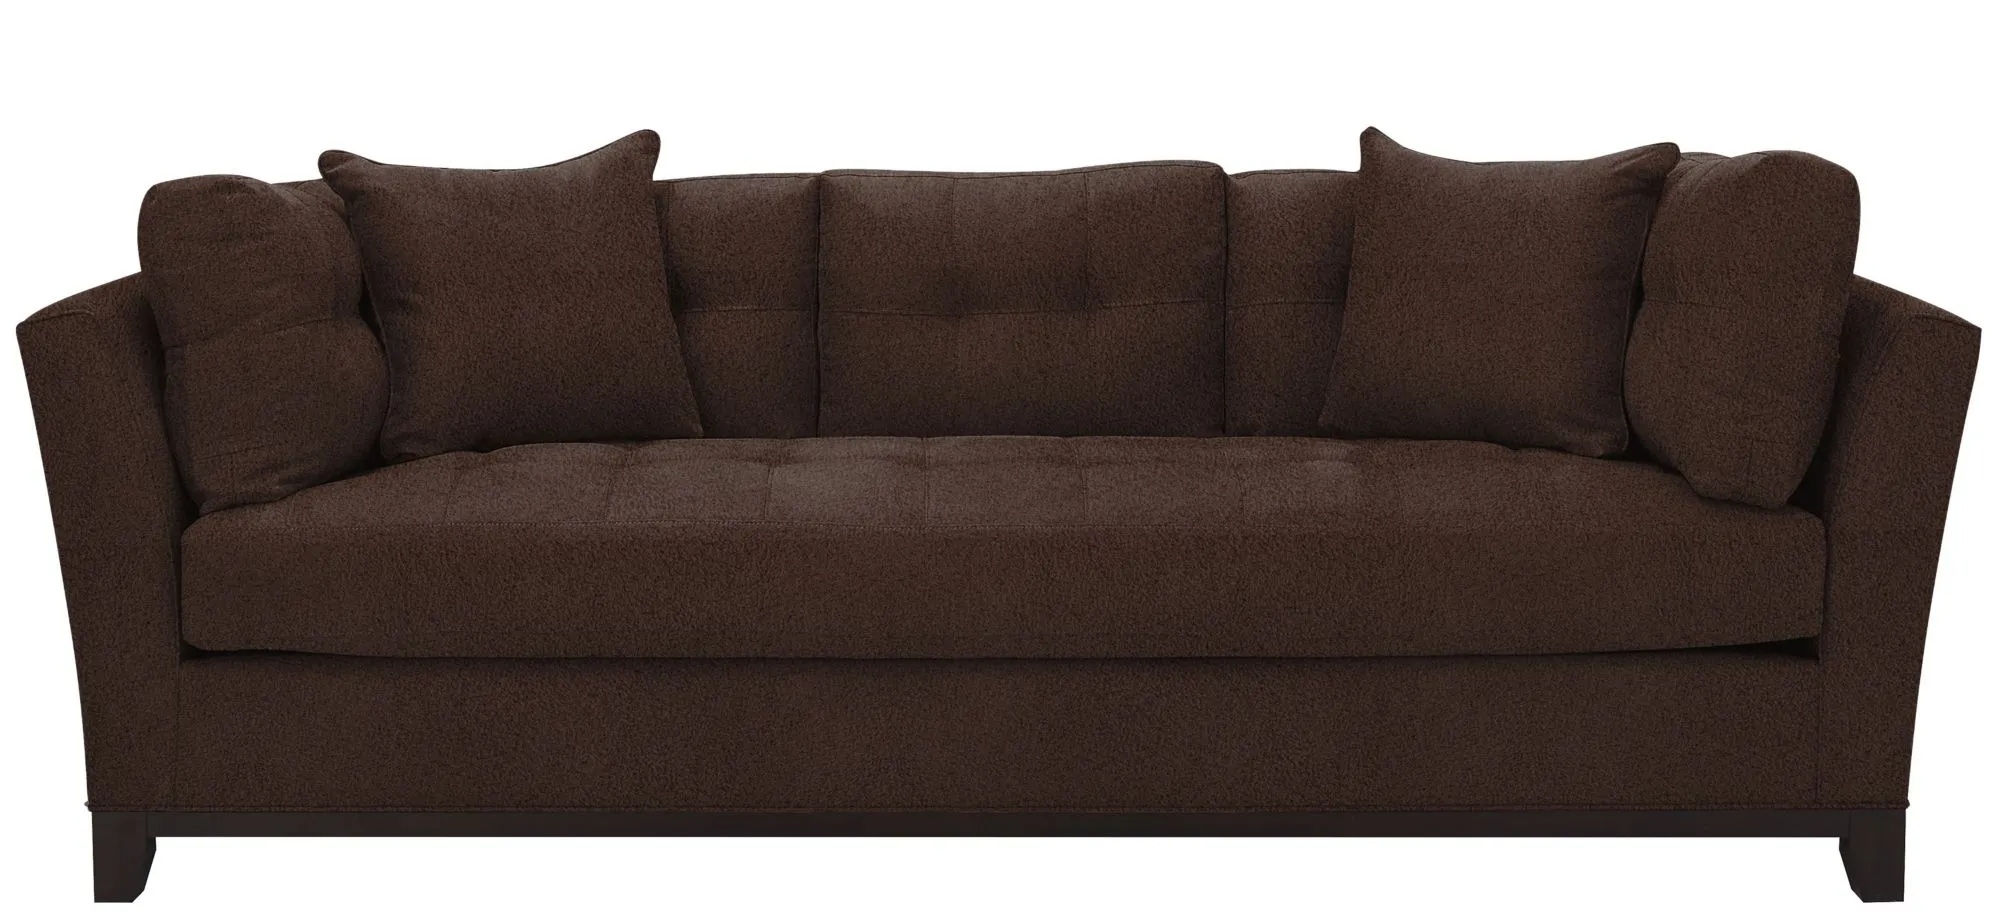 Cityscape Sofa in Suede So Soft Chocolate by H.M. Richards